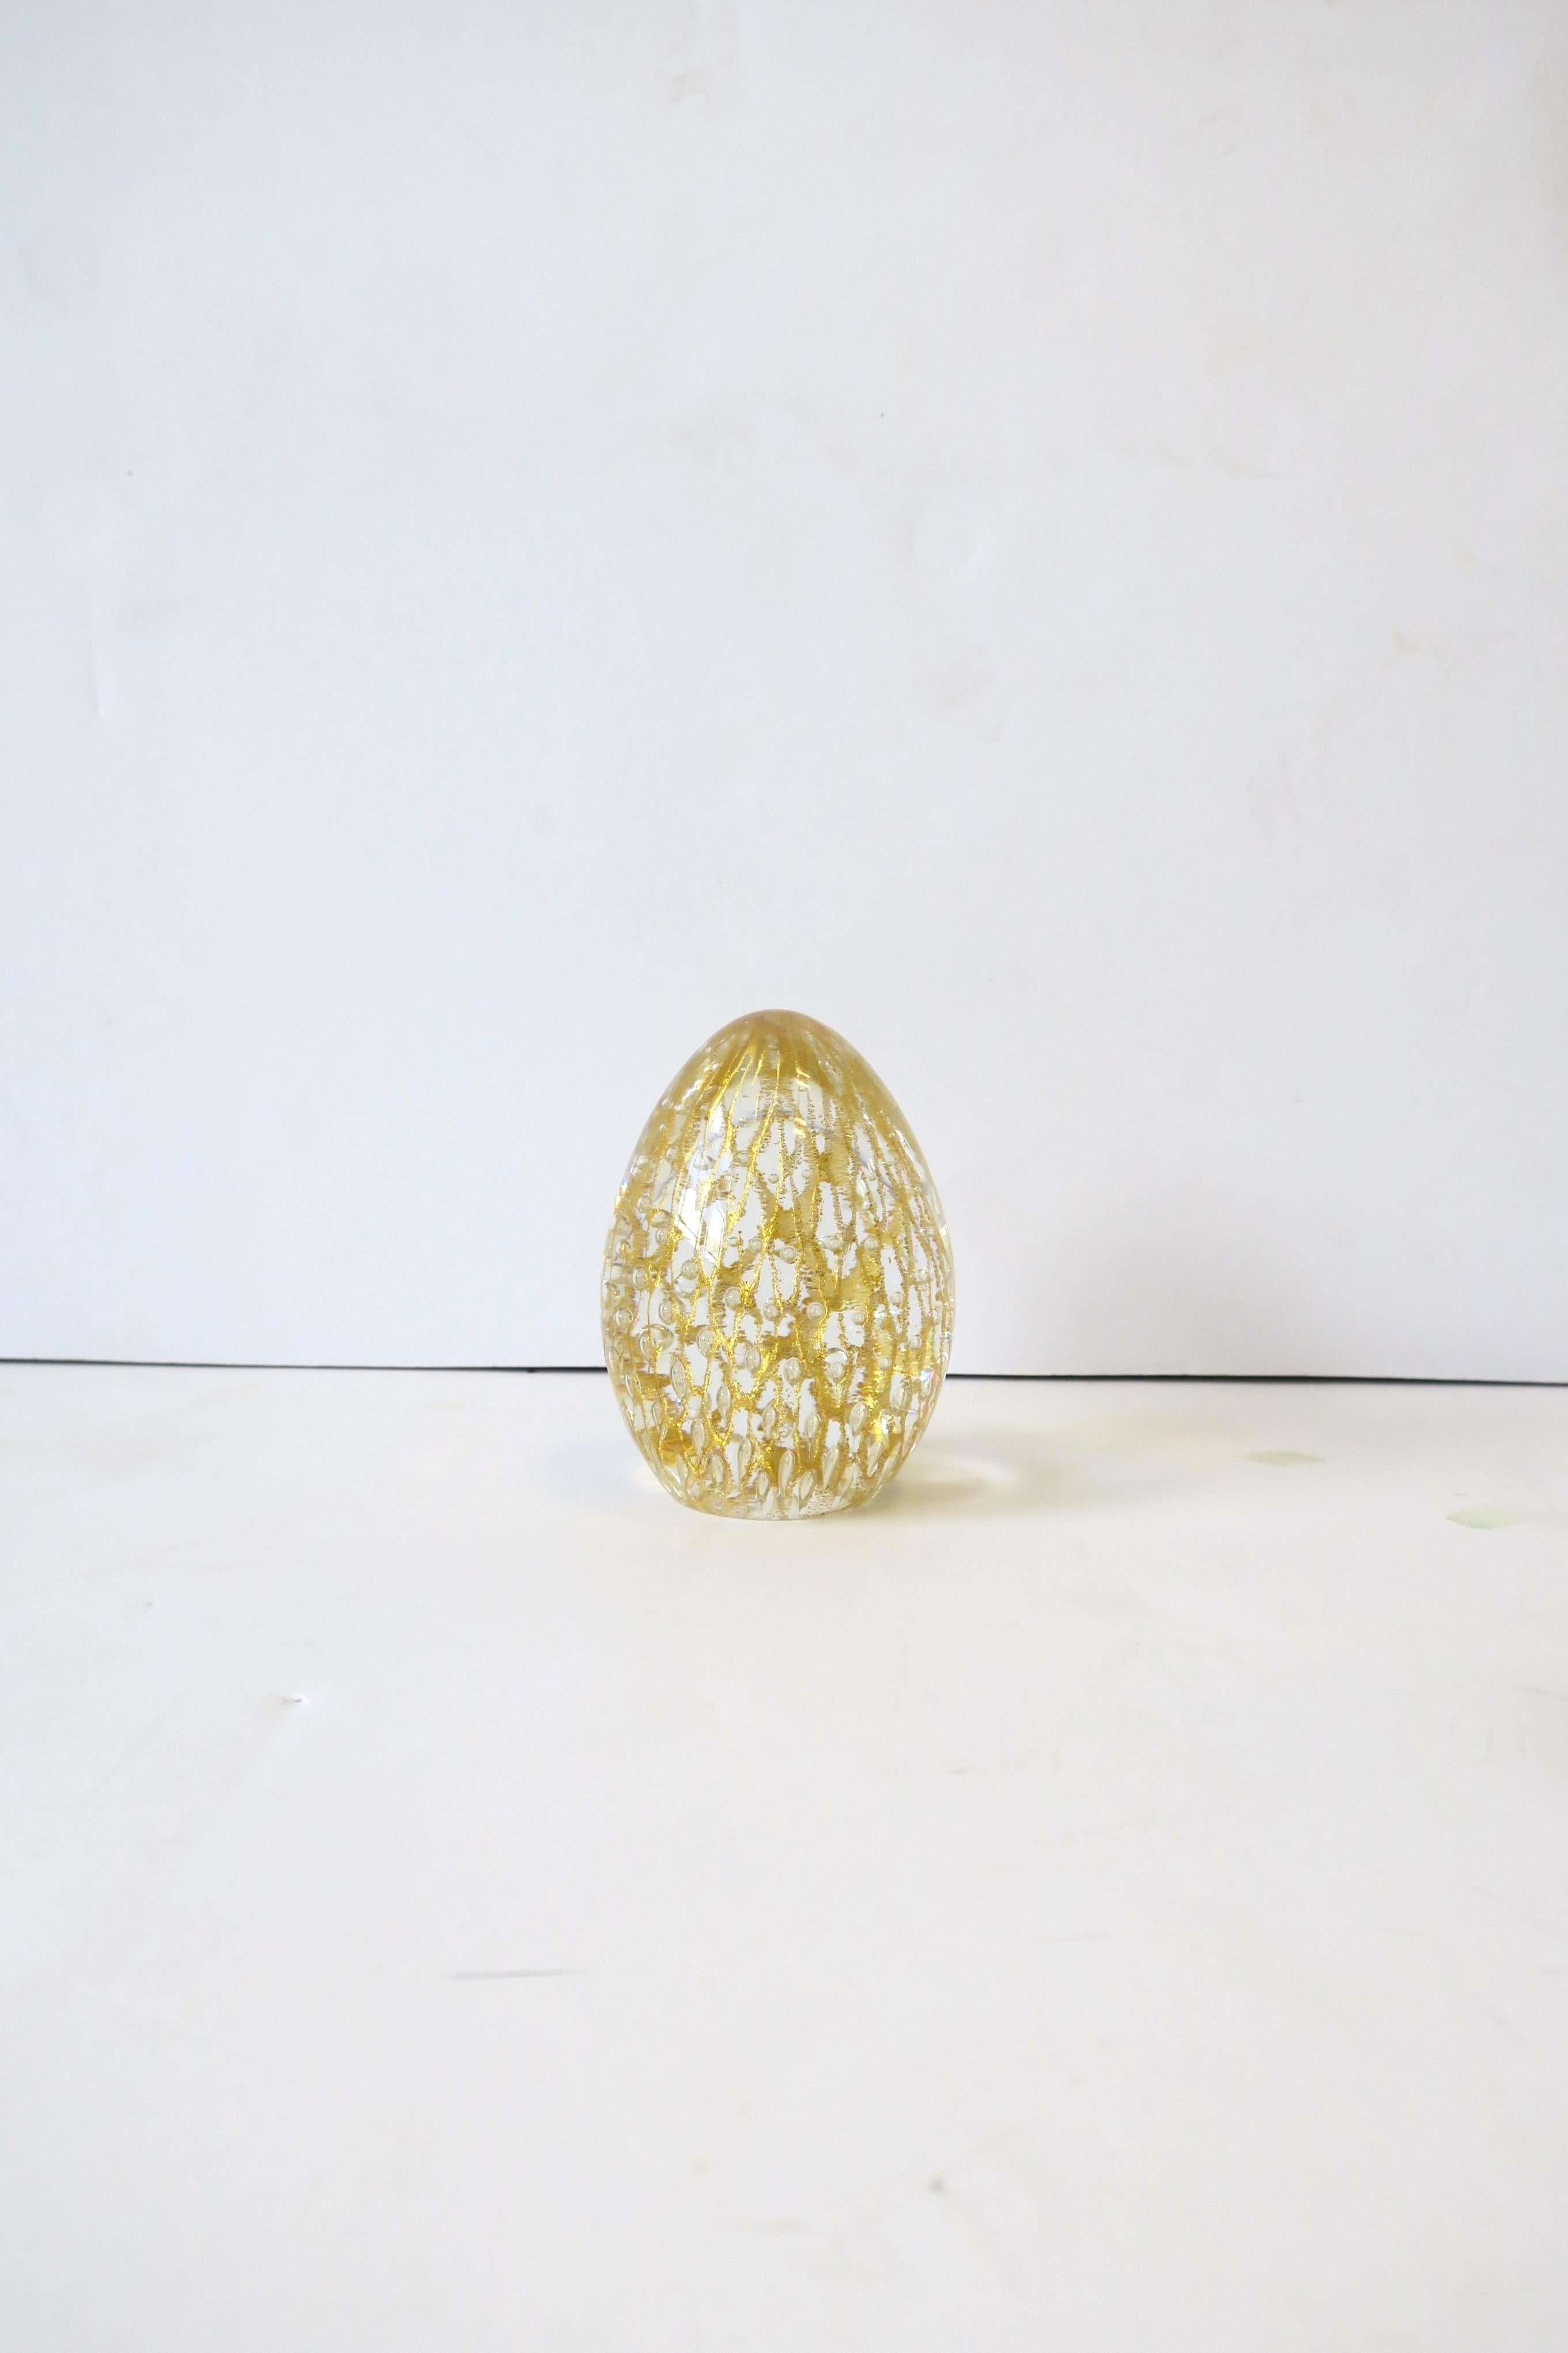 A beautiful Italian Murano gold and clear egg-shaped art glass object, circa late-20th century, Italy. This hand-crafted piece is shimmering gold and transparent Murano art glass. A beautiful decorative object (as demonstrated.) Marked 'Veniza'